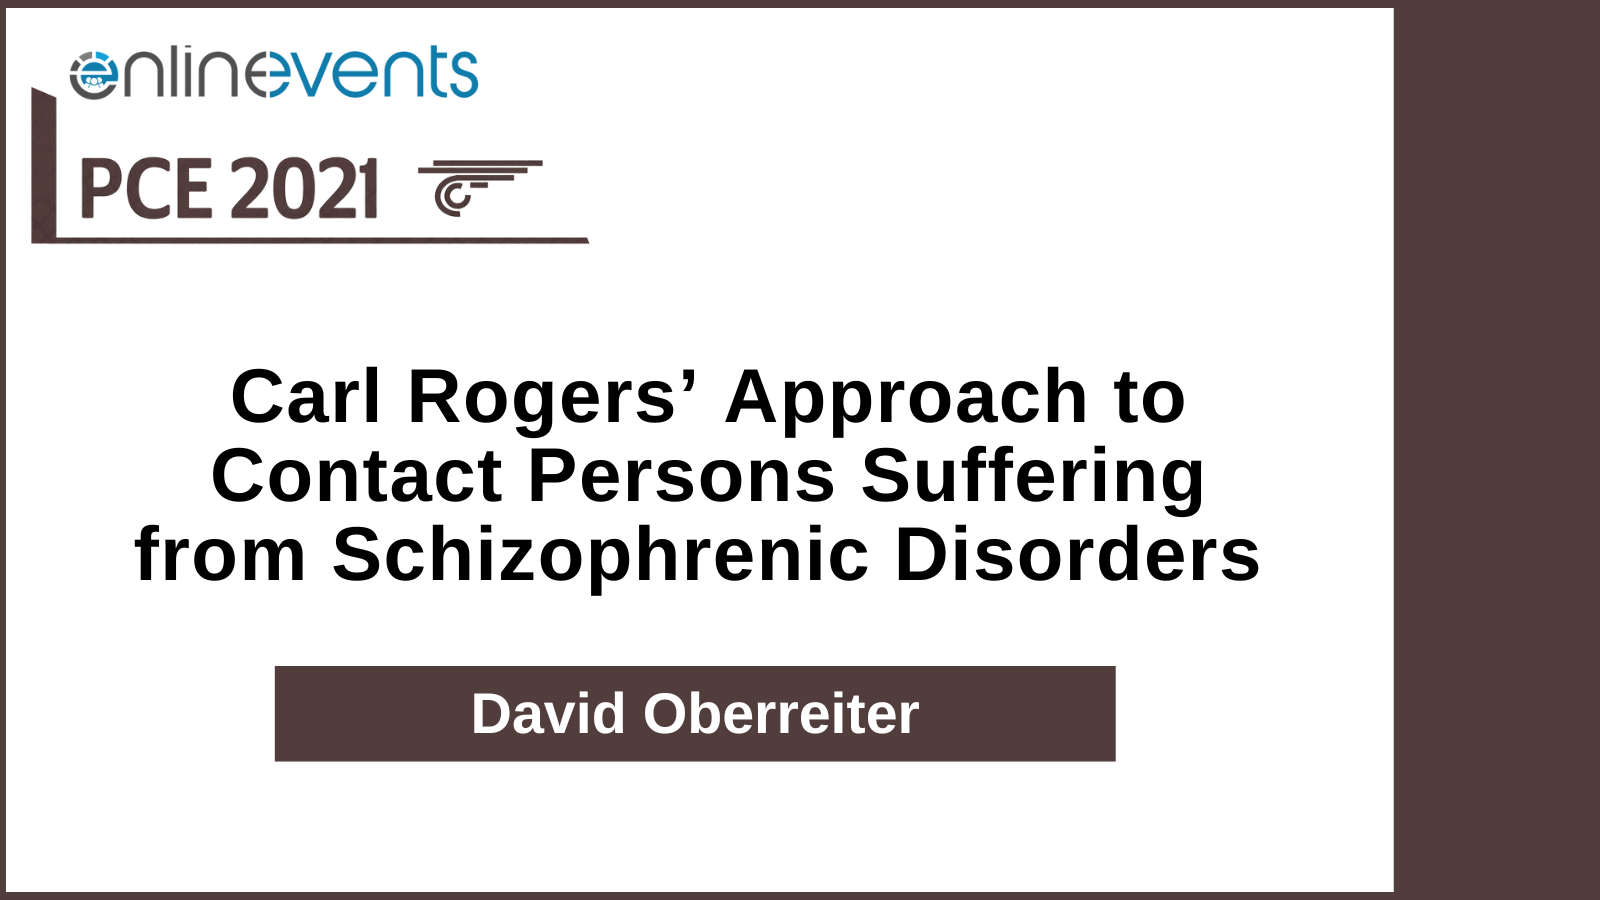 Carl Rogers’ Approach to Contact Persons Suffering from Schizophrenic Disorders – David Oberreiter